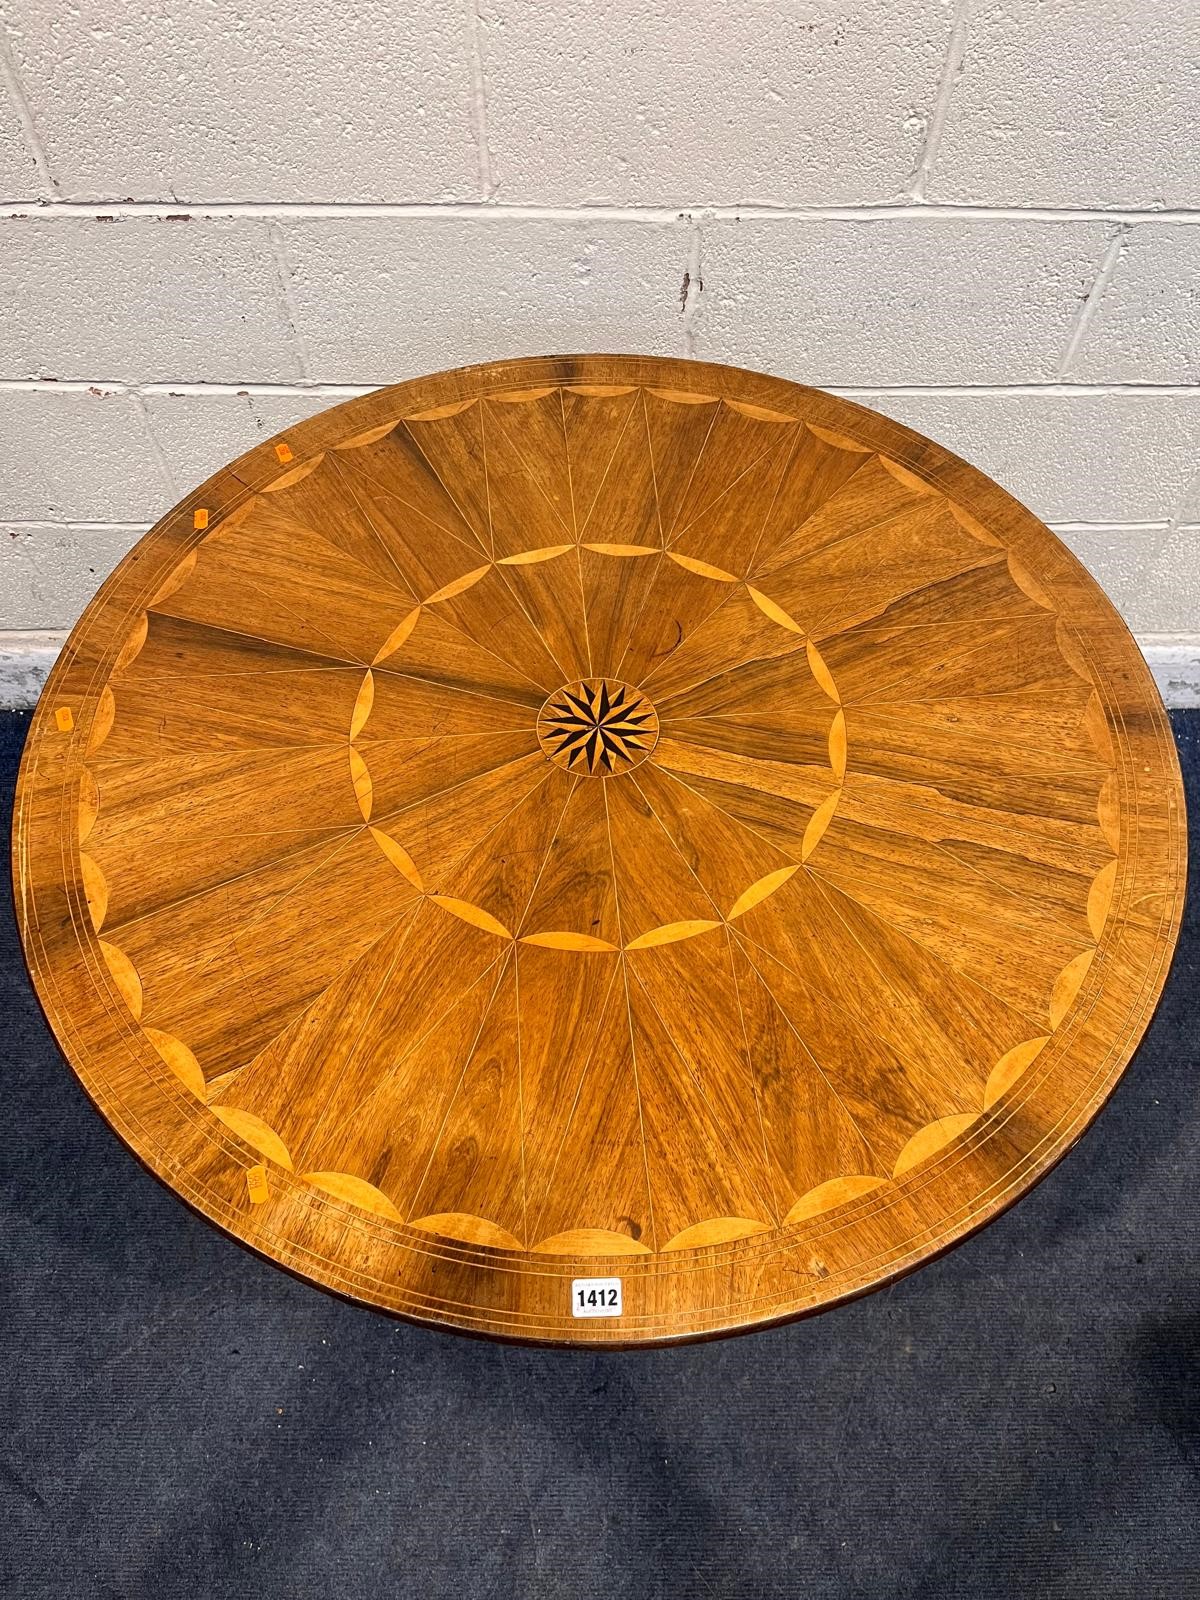 A 19TH CENTURY ROSEWOOD AND PARQUETRY INLAID CIRCULAR REVOLVING DRUM TABLE, central starburst, - Image 2 of 5